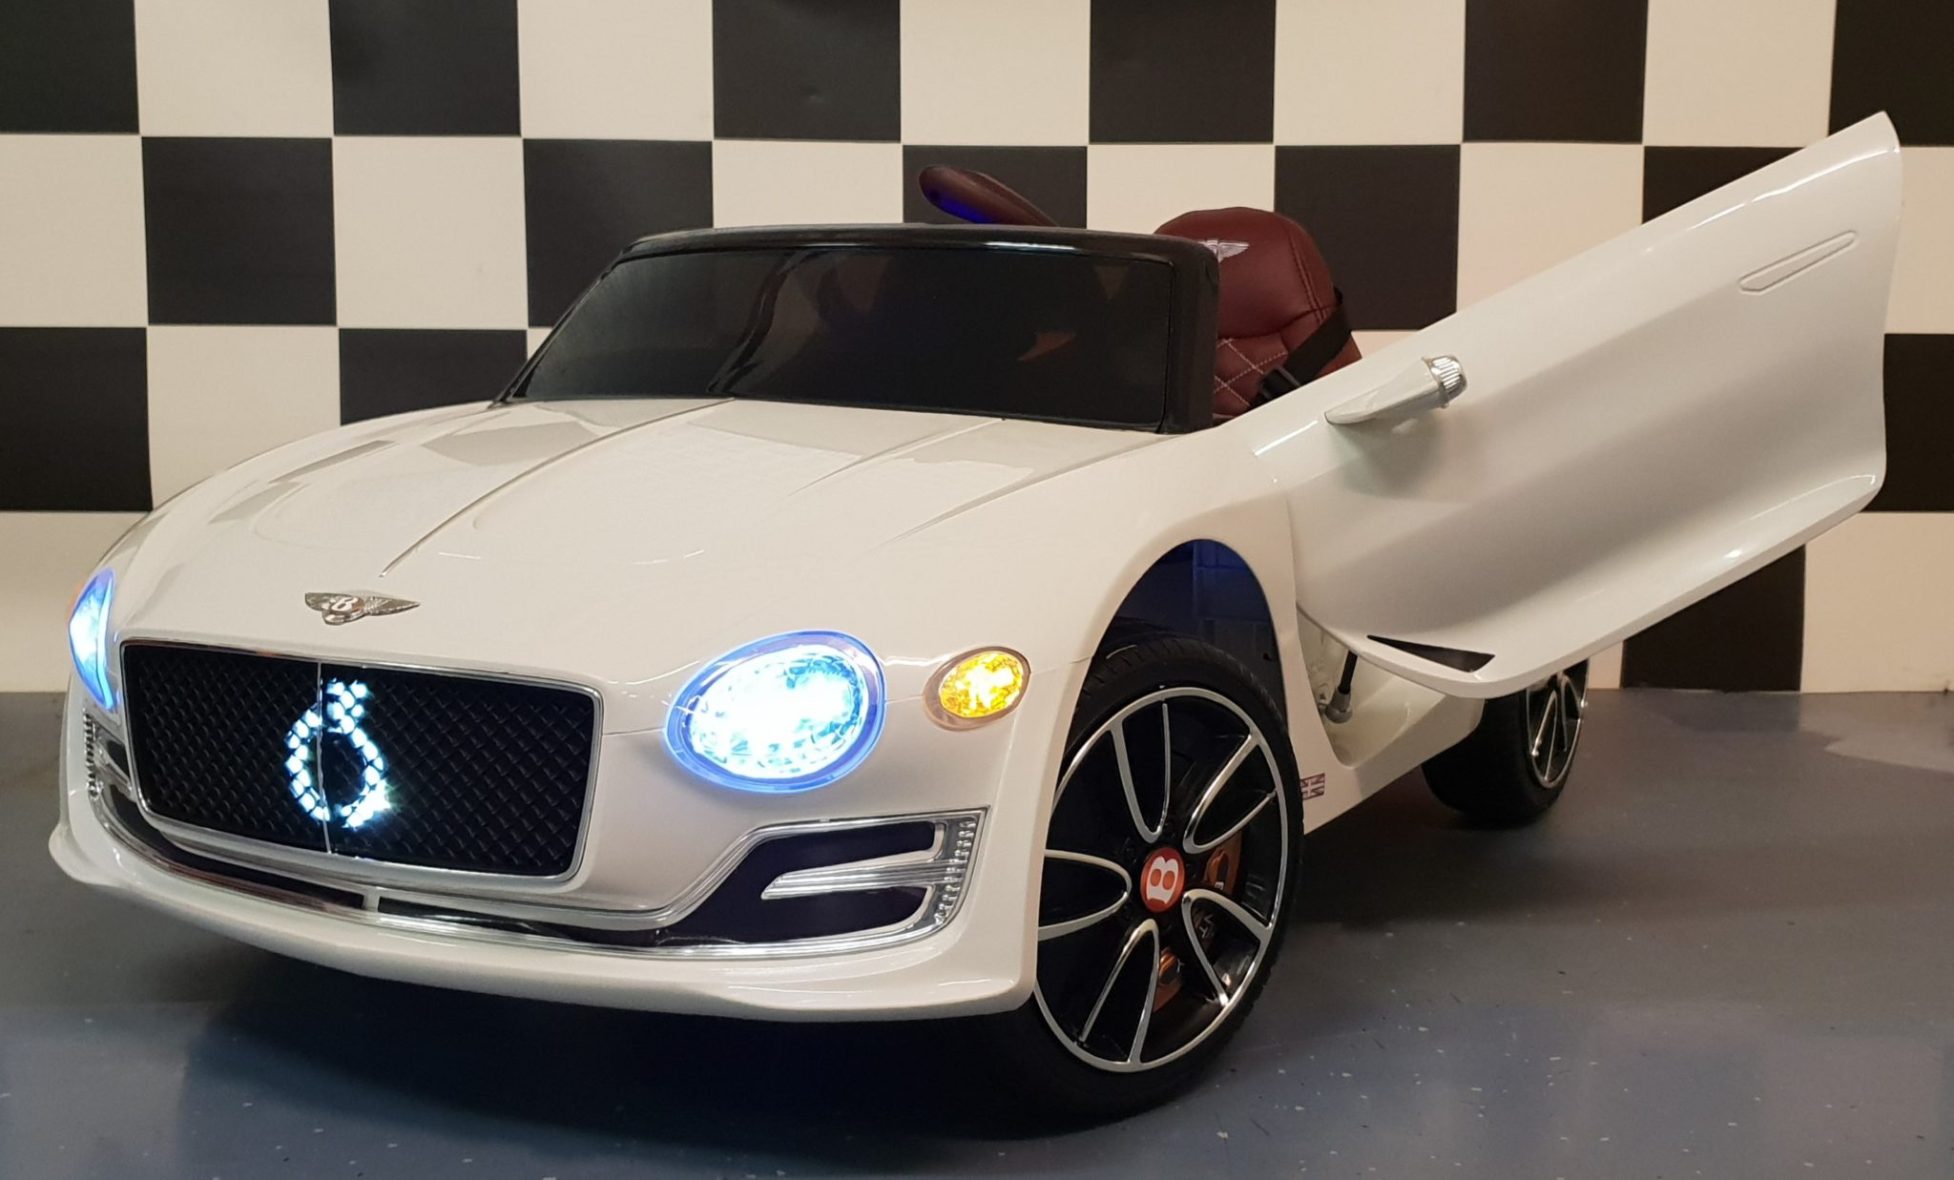 Children’s Car Bentley Exp 12 Volts with Remote Control White